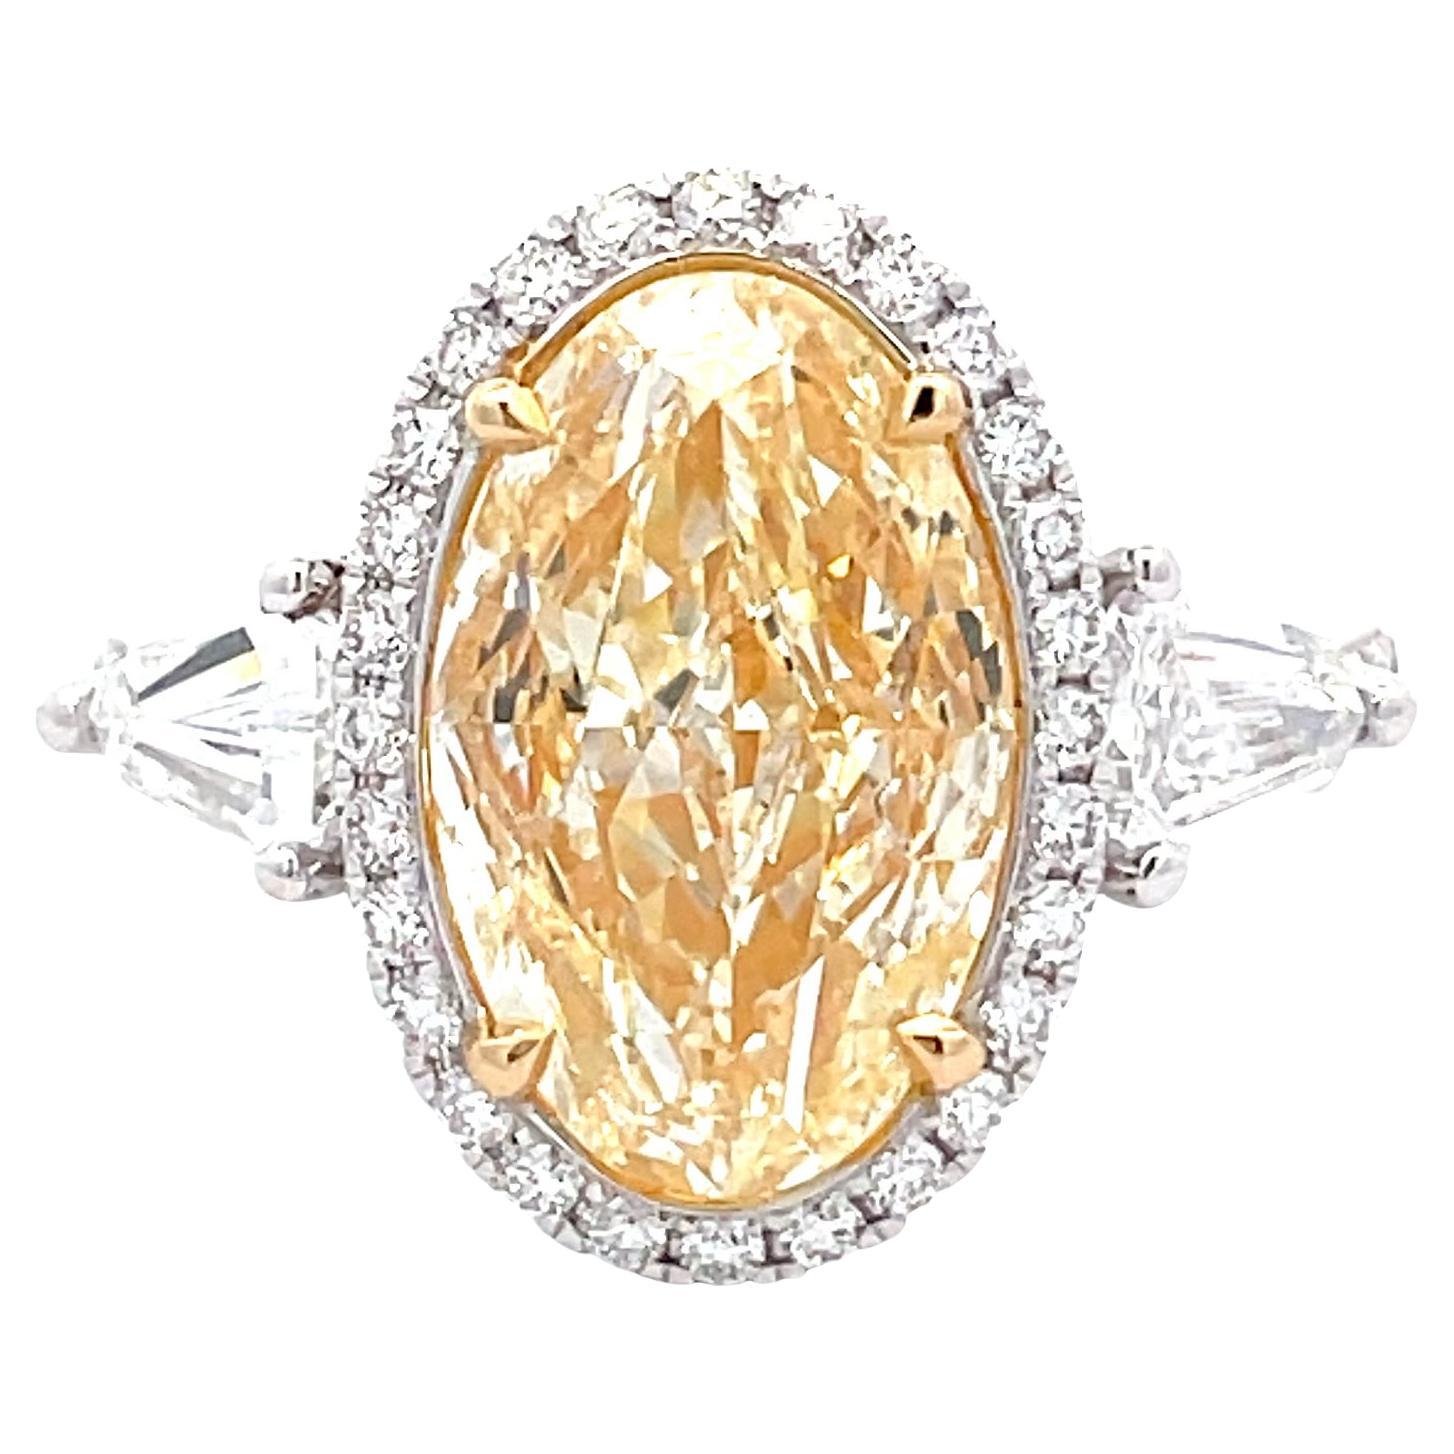 GIA Certified 5.02ct Yellow DIA OVAL with 1.13ct White Dia 18KW RING